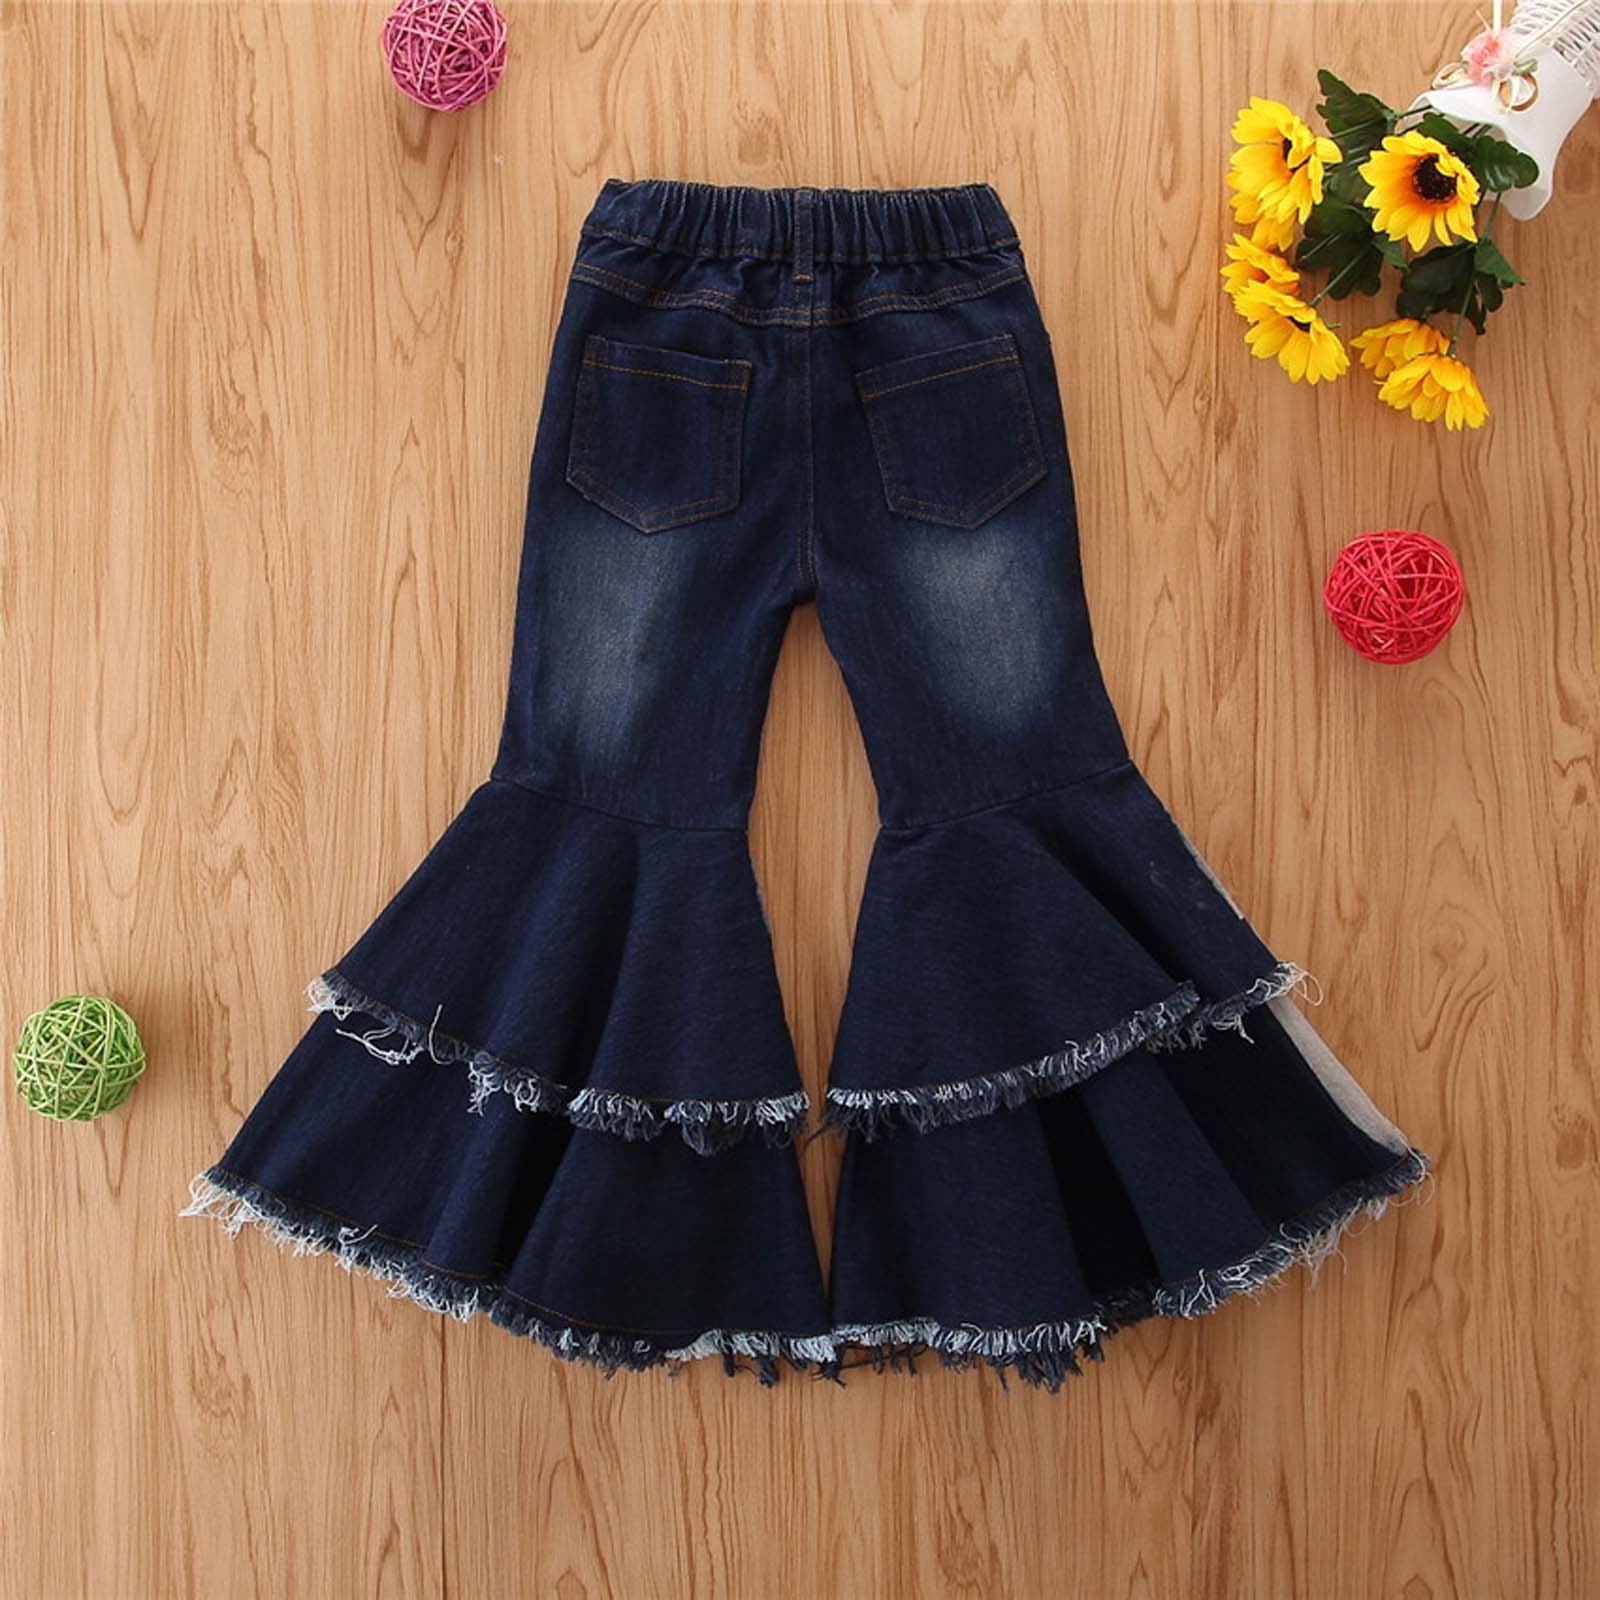 Spring Autumn Kids Girls Jeans Casual All-match Trumpet Jeans Flared Pants Children Pants Outfits Kids Clothes 2-7 Years